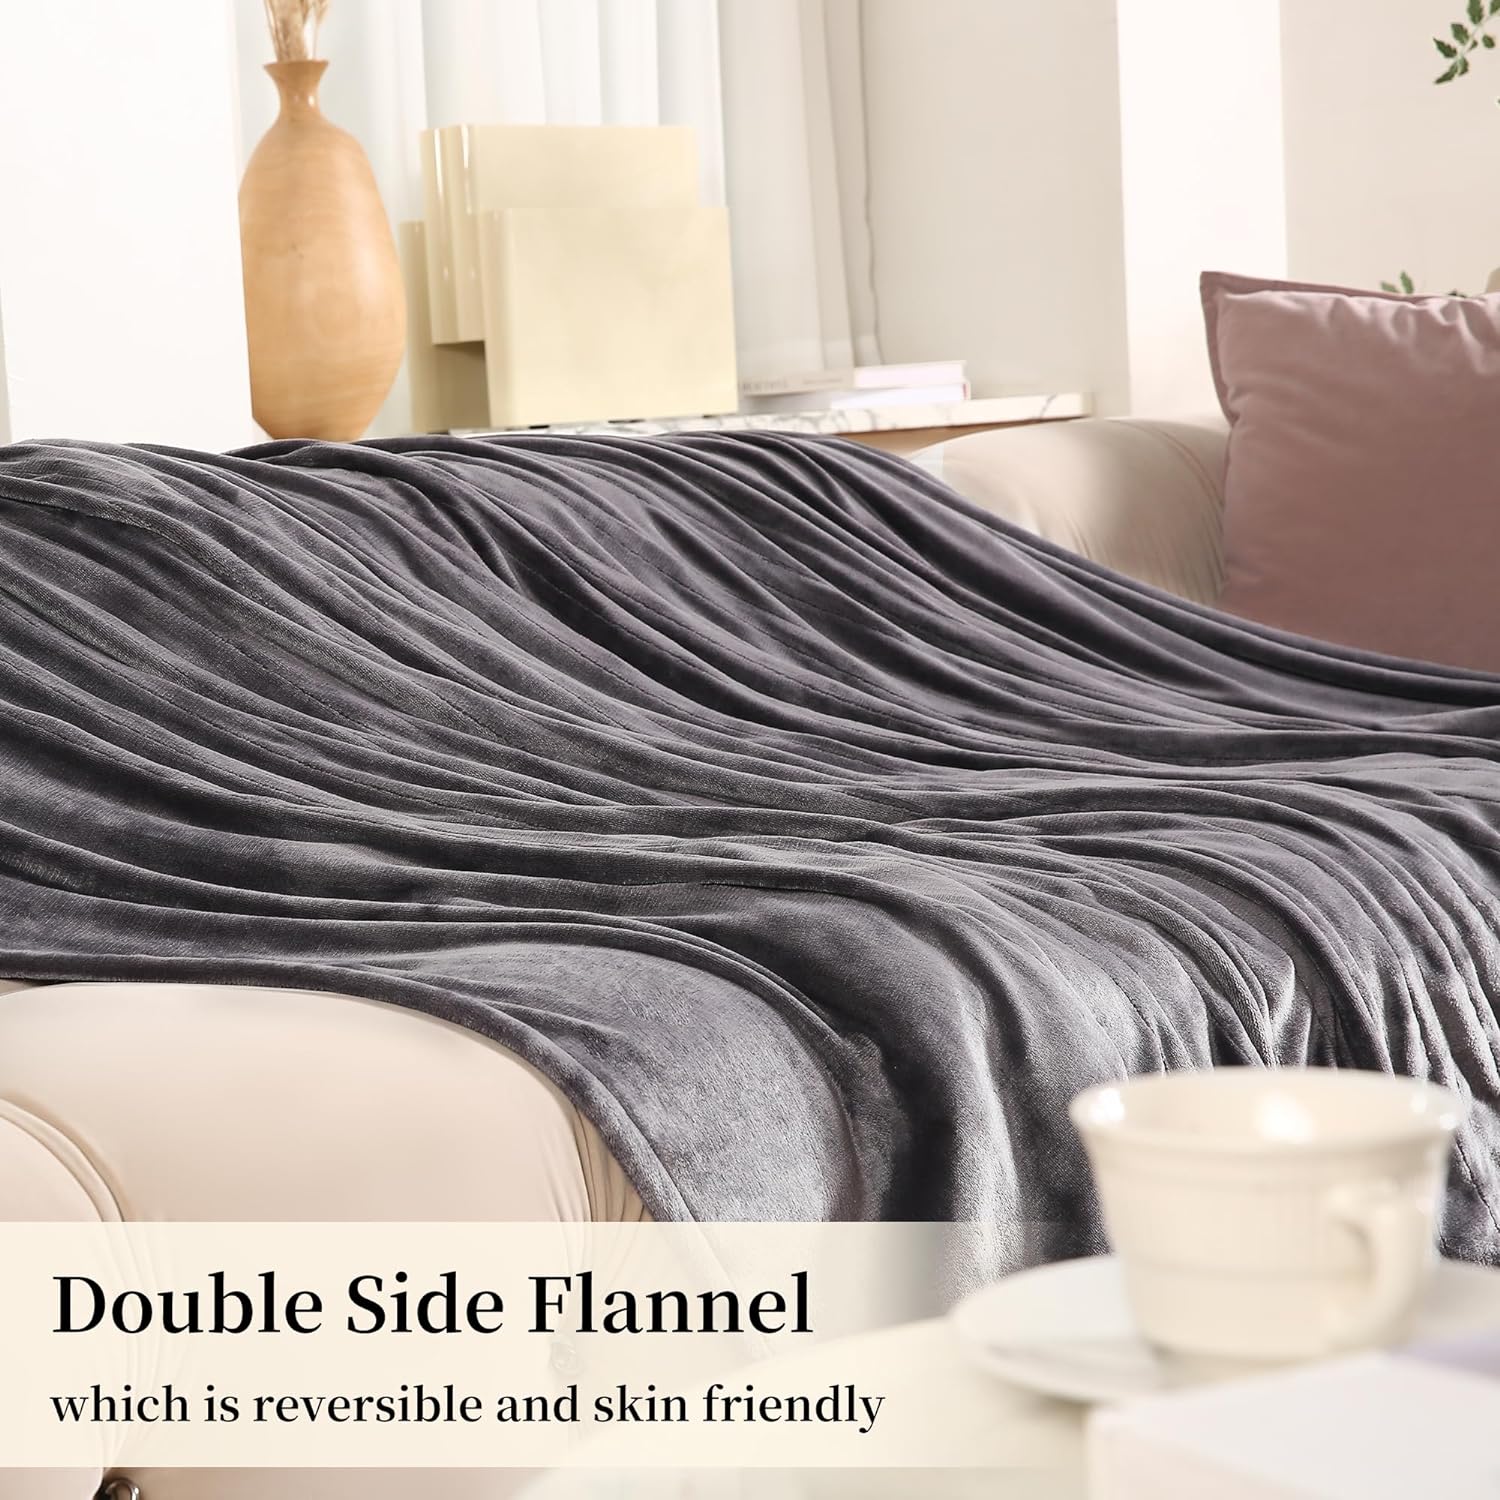 Heated Blanket Electric Blanket Full Size, 72" x 84" Heating Blanket with 6 Heating Levels & 1-10 Hours Auto Off, Super Silky Flannel Electric Heated Blanket with ETL & FCC Certification, Dark Gray